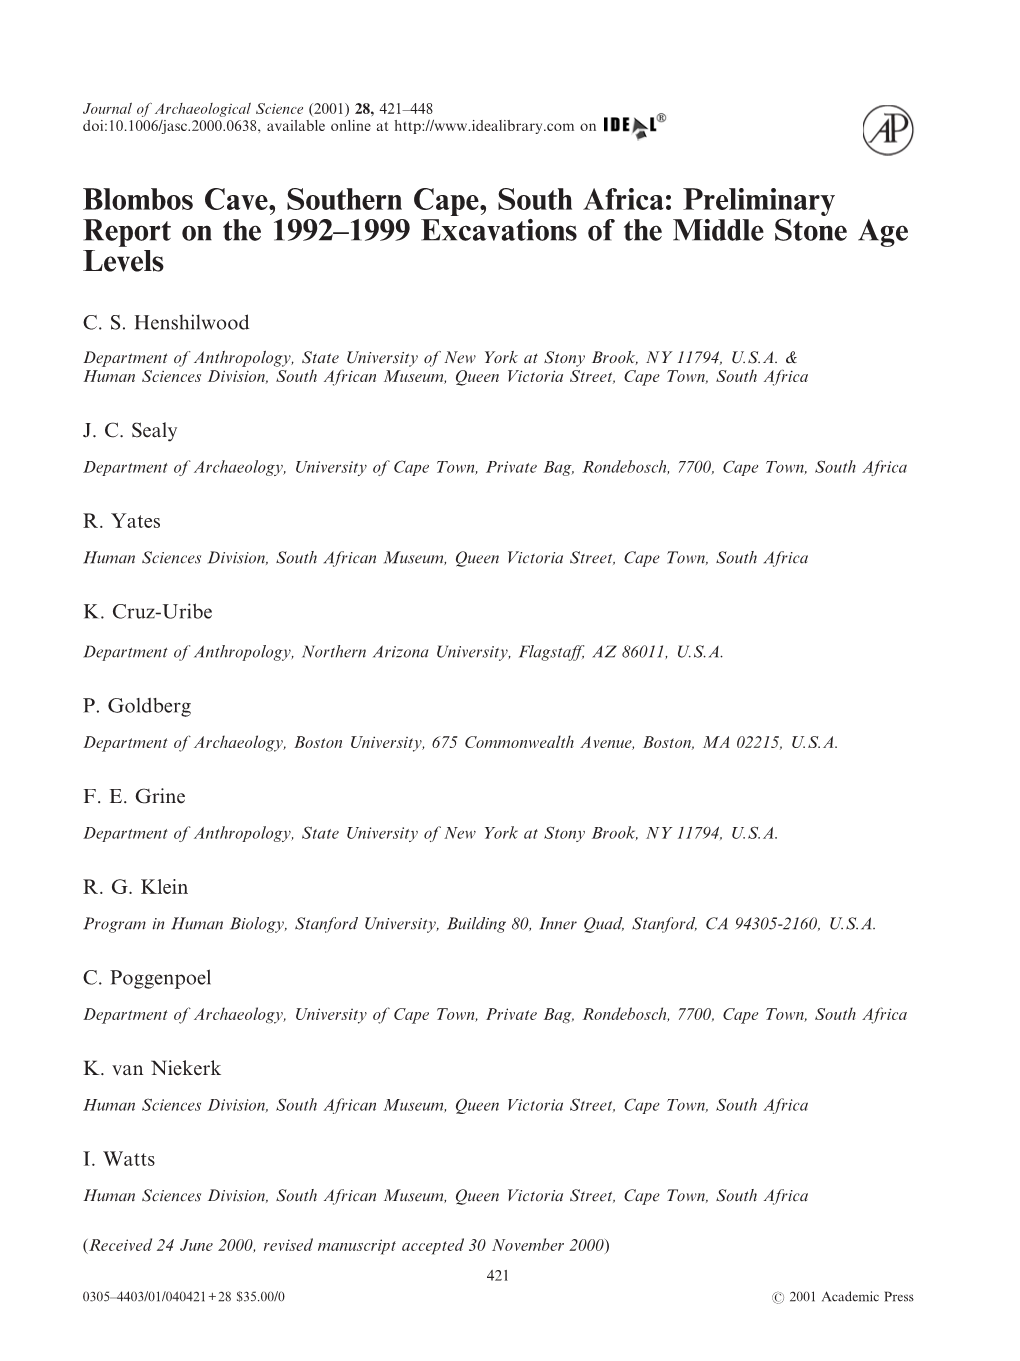 Blombos Cave, Southern Cape, South Africa: Preliminary Report on the 1992–1999 Excavations of the Middle Stone Age Levels